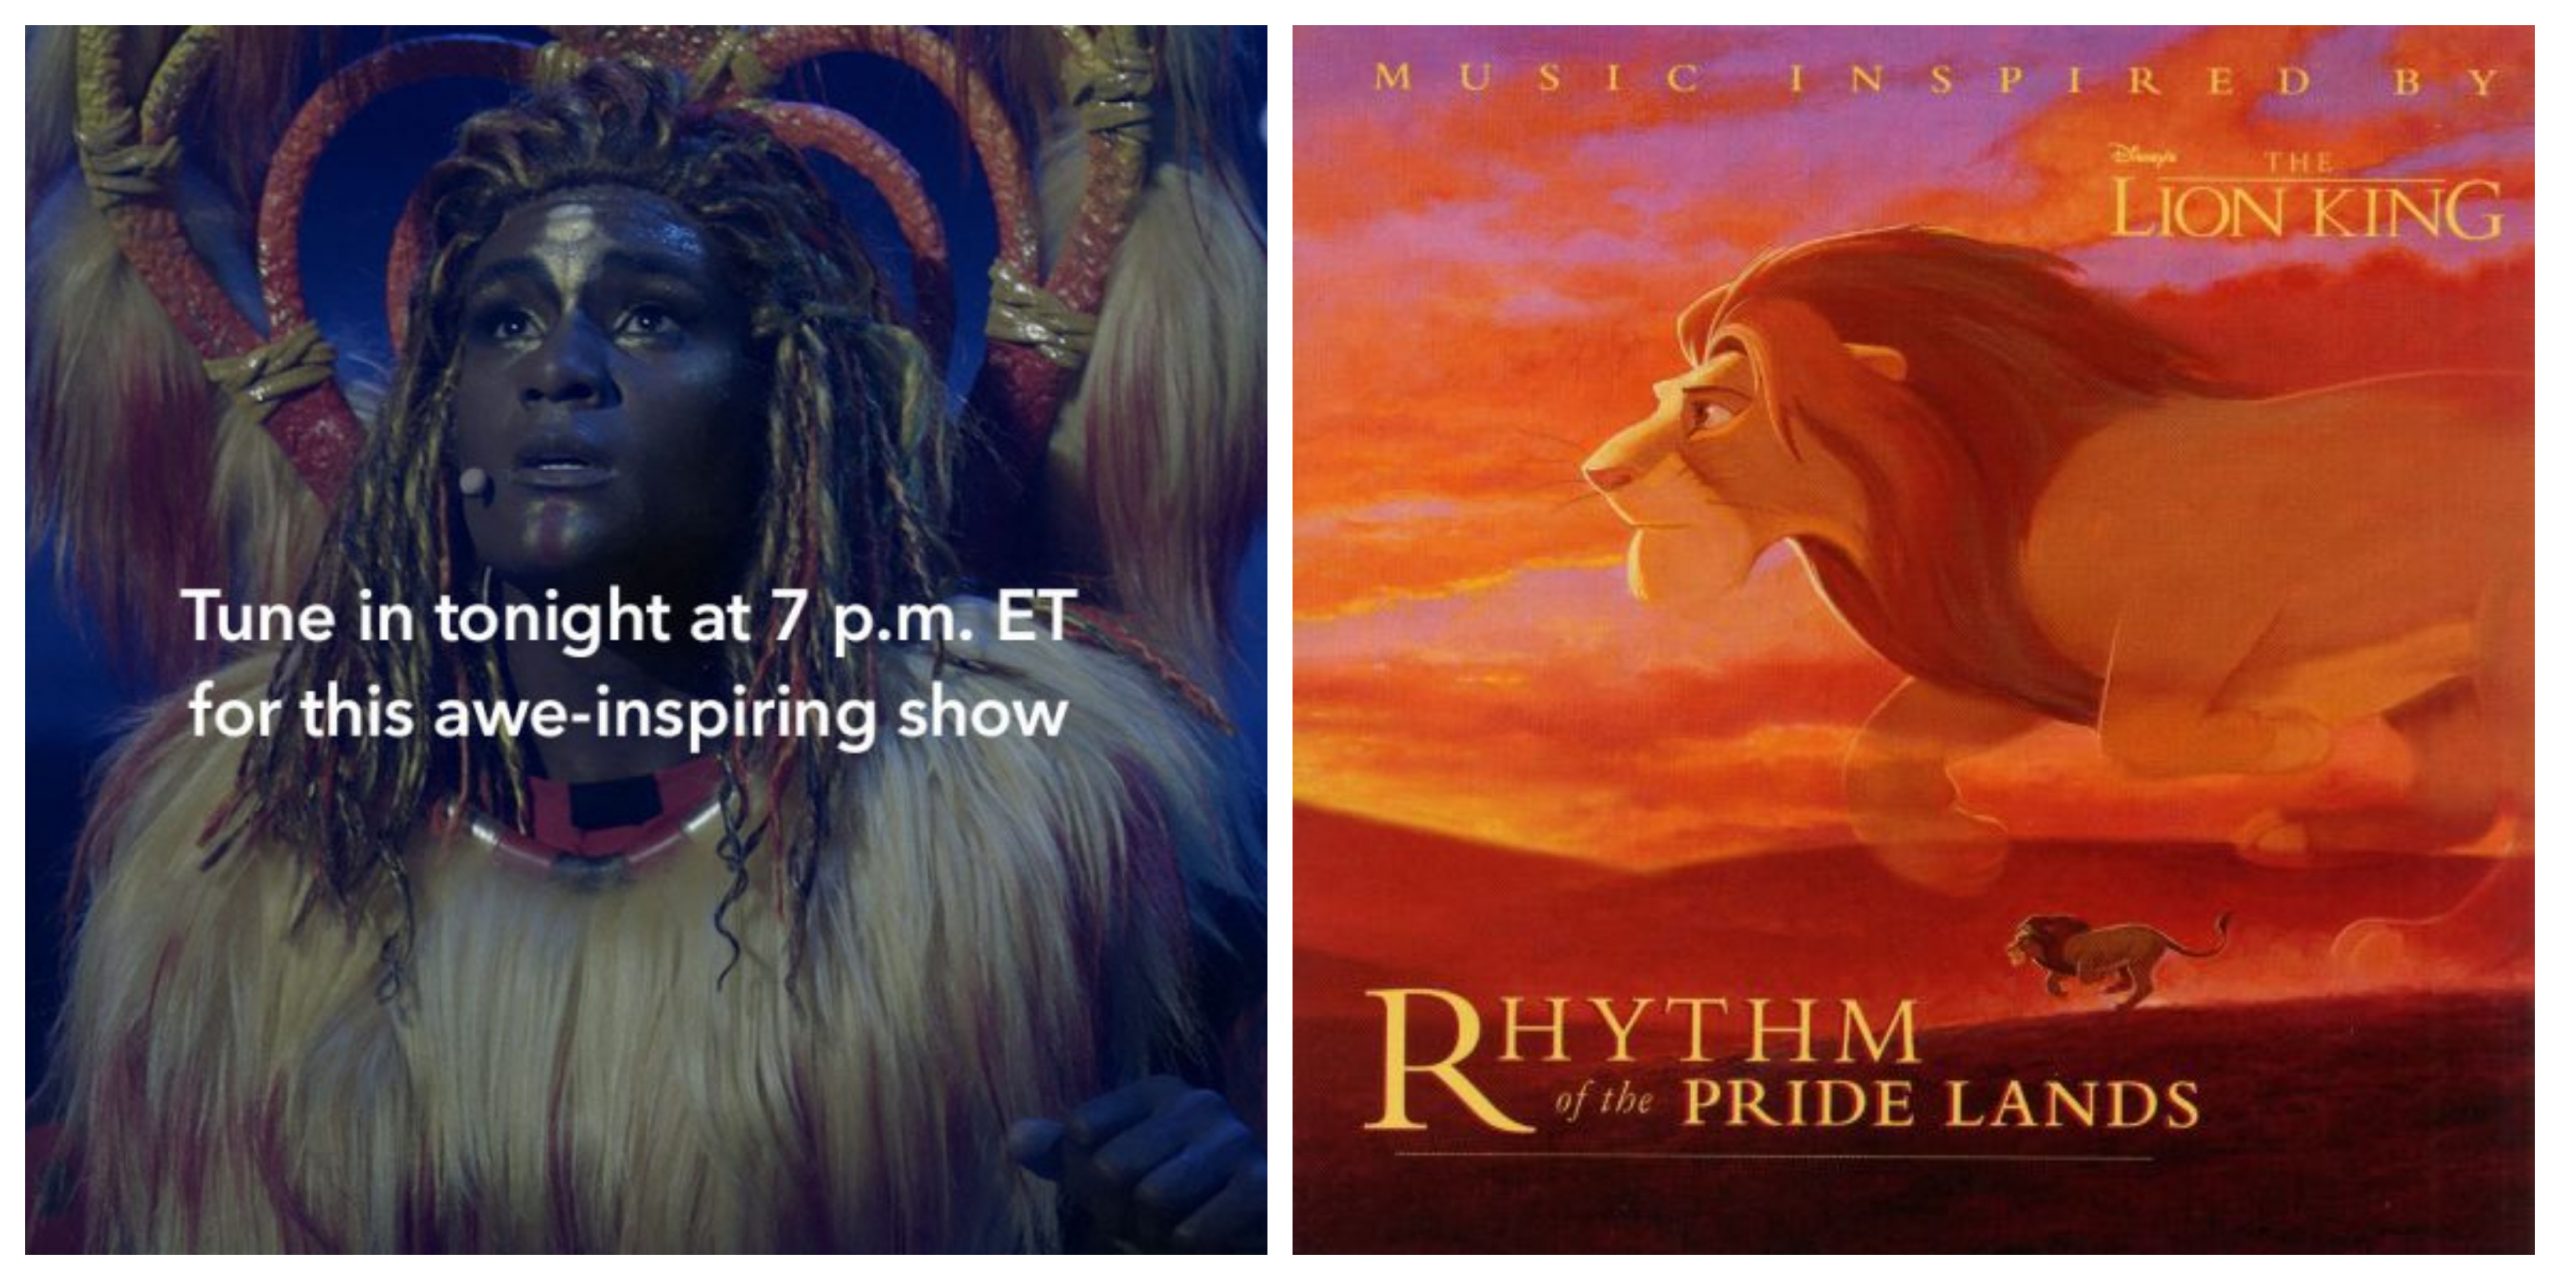 Tune in Tonight to watch The Lion King: Rhythms of the Pride Lands at Disneyland Paris